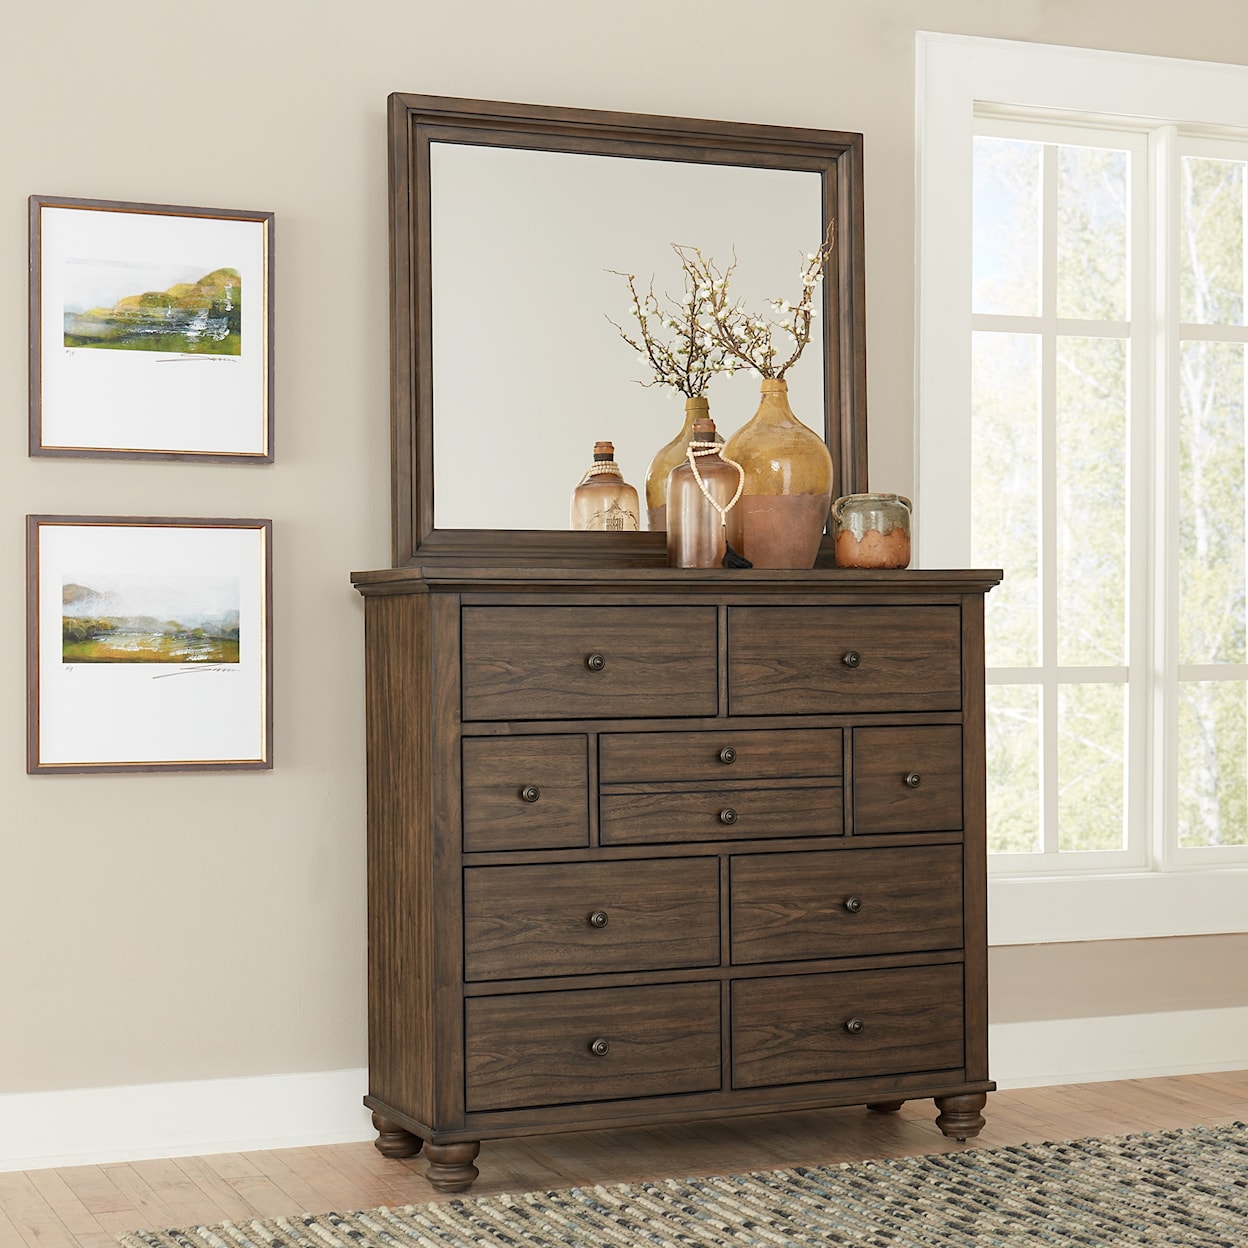 Aspenhome Hudson Valley Wide Chest of Drawers